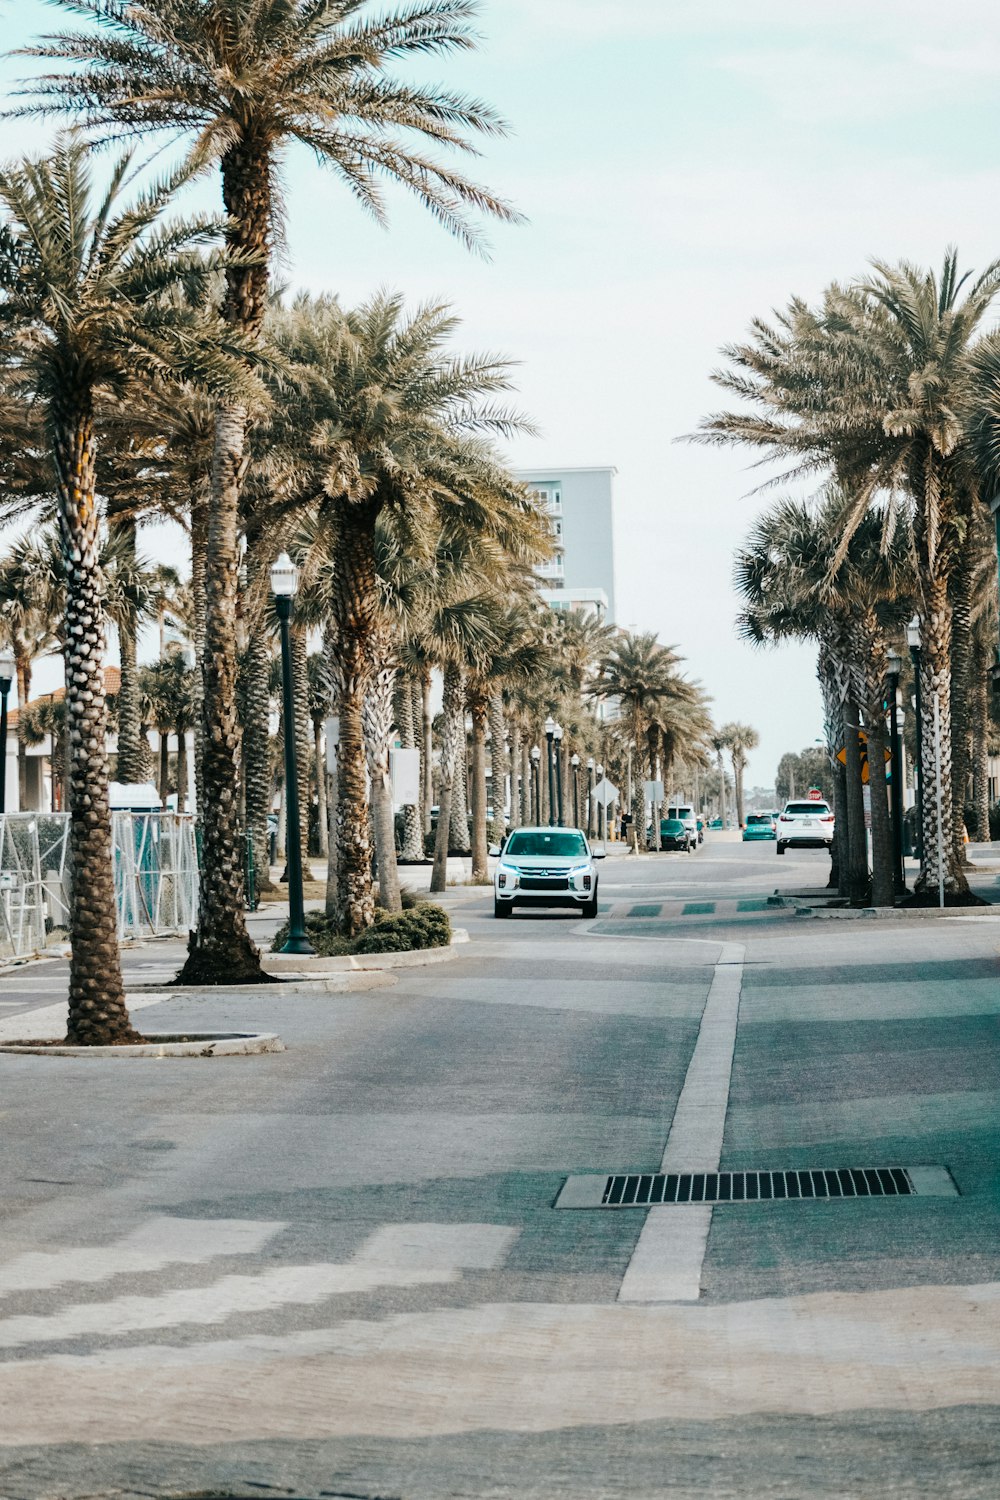 a city street with palm trees and cars